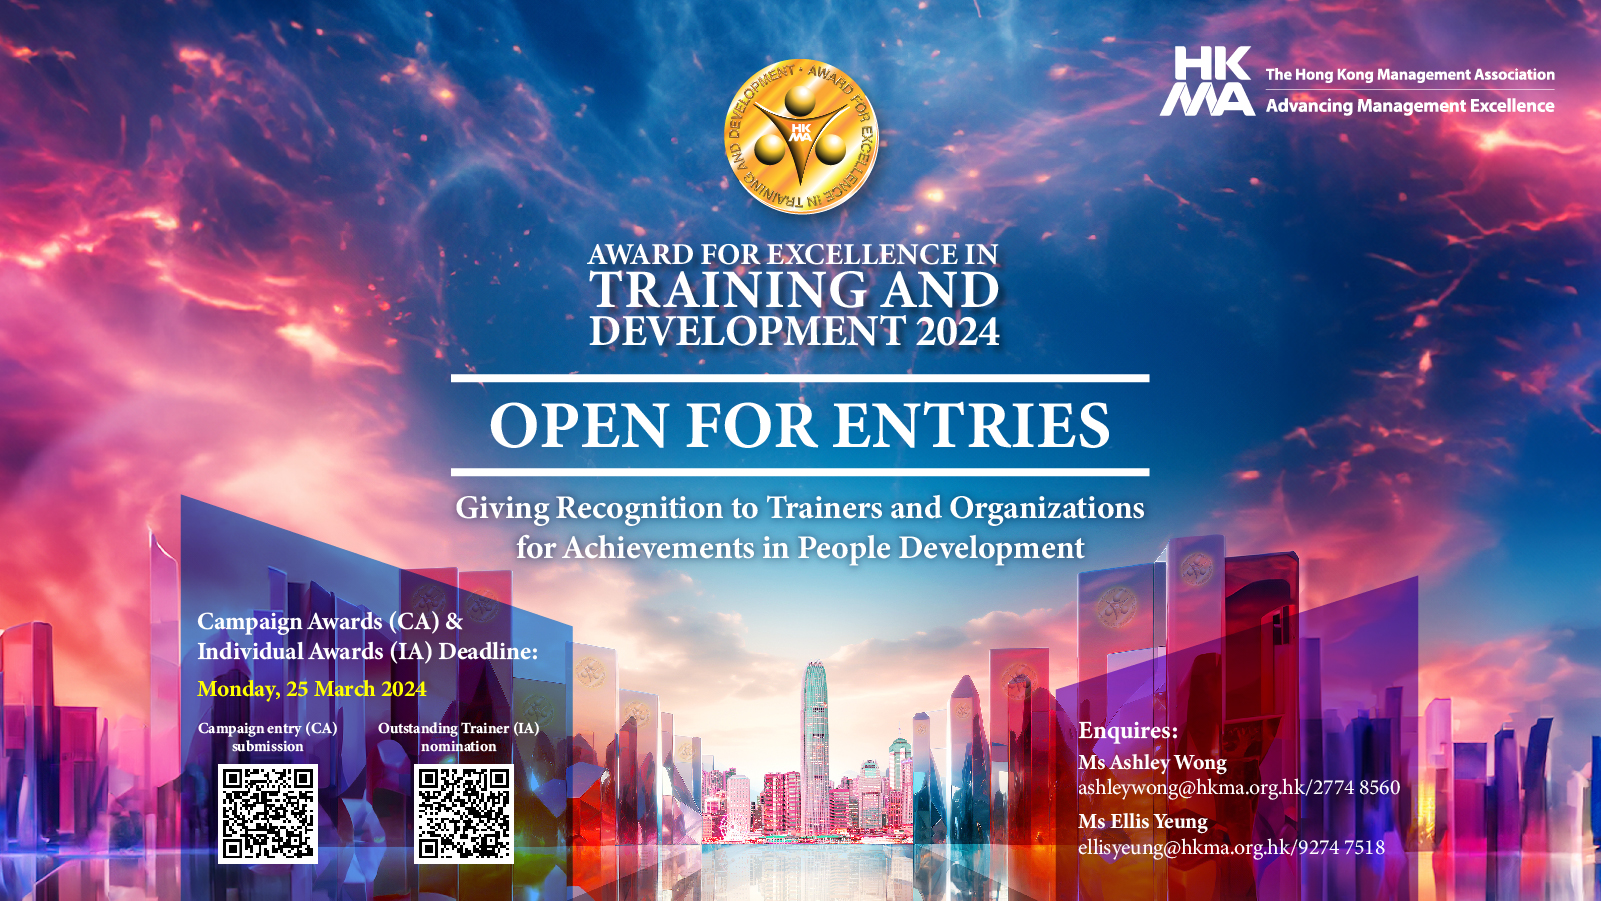 Award for Excellence in Training and Development 2024 - Call for Entries